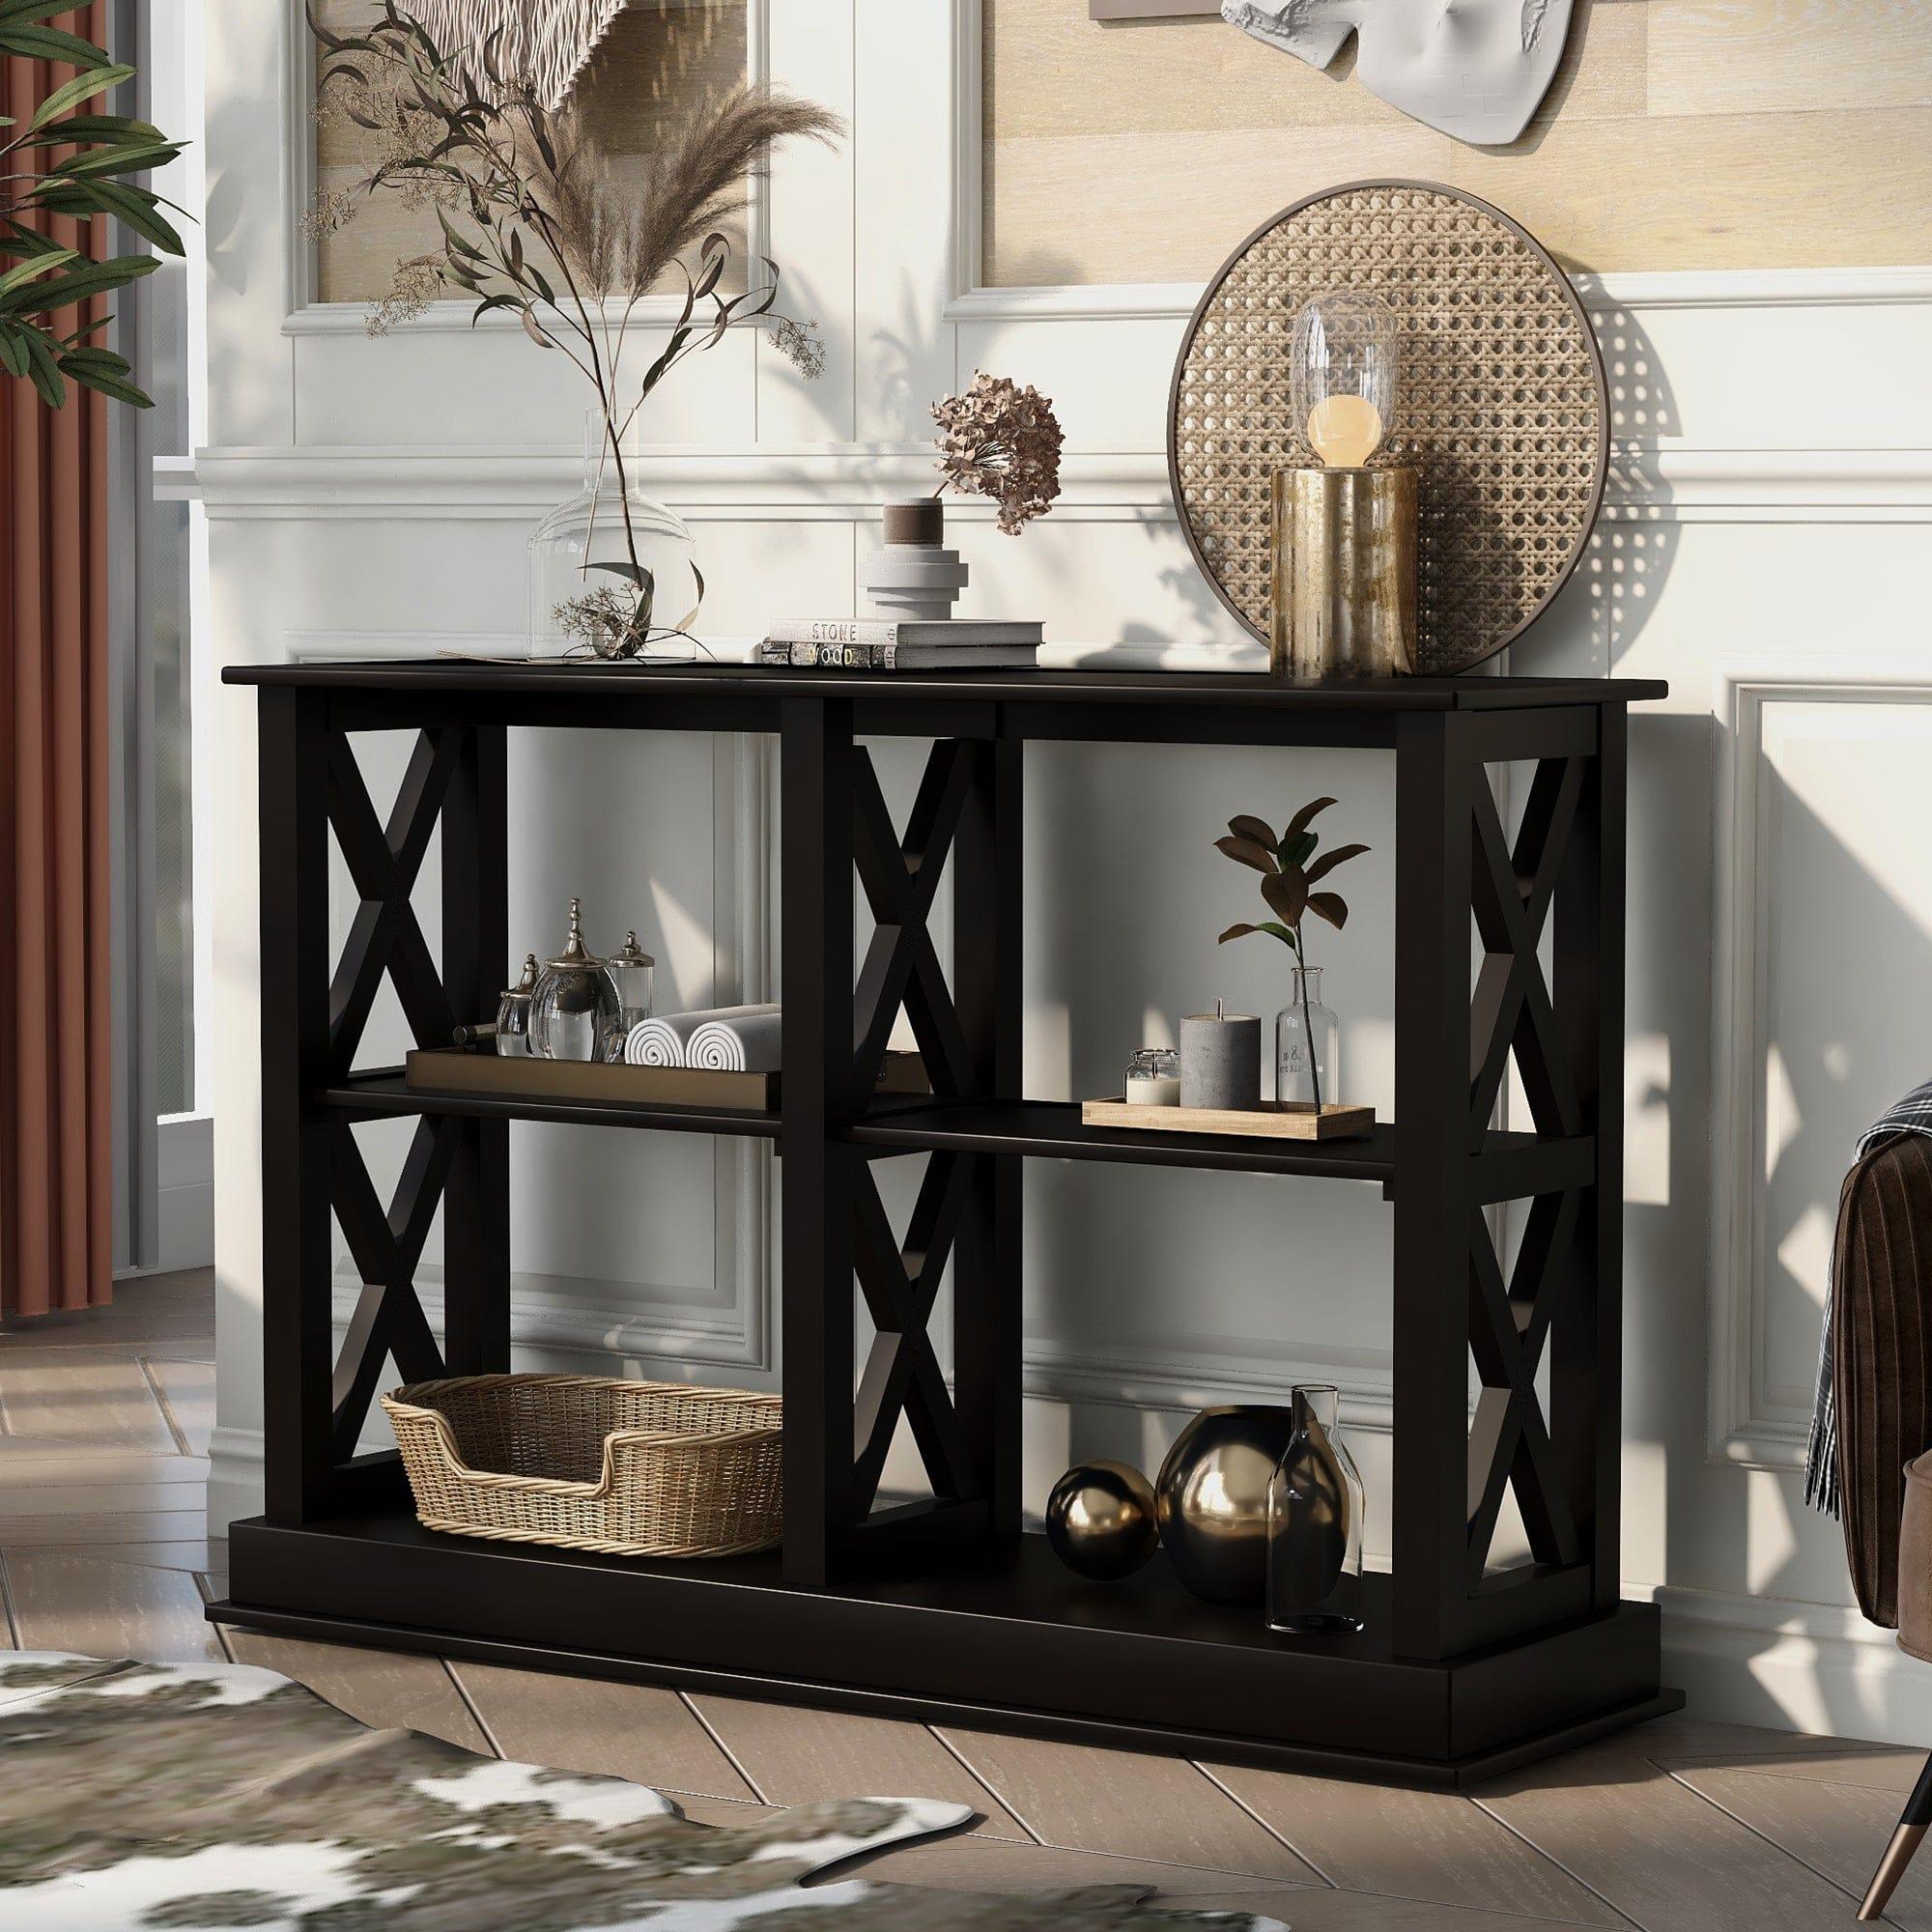 Shop TREXM Console Table with 3-Tier Open Storage Spaces and “X” Legs, Narrow Sofa Entry Table for Living Room, Entryway and Hallway (Black) Mademoiselle Home Decor